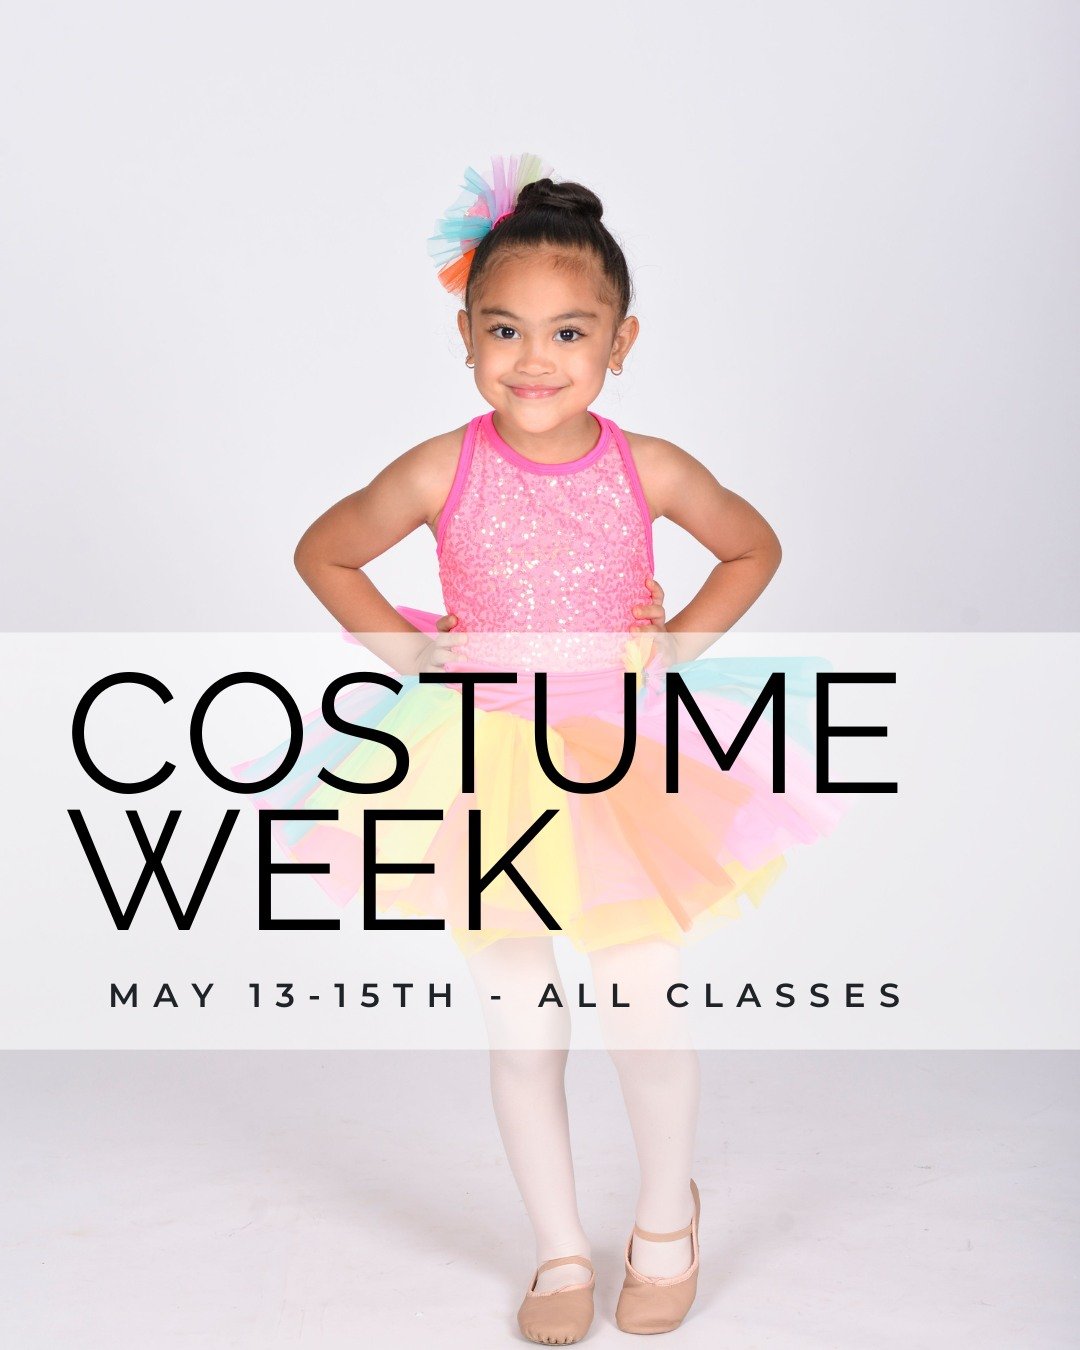 COSTUME WEEK: Send your dancer in costume to class. Parents may come in to the last 15min of class to get last minute recital details. No hair and makeup necessary these days unless you want to practice, we will be sending hair and makeup details in 